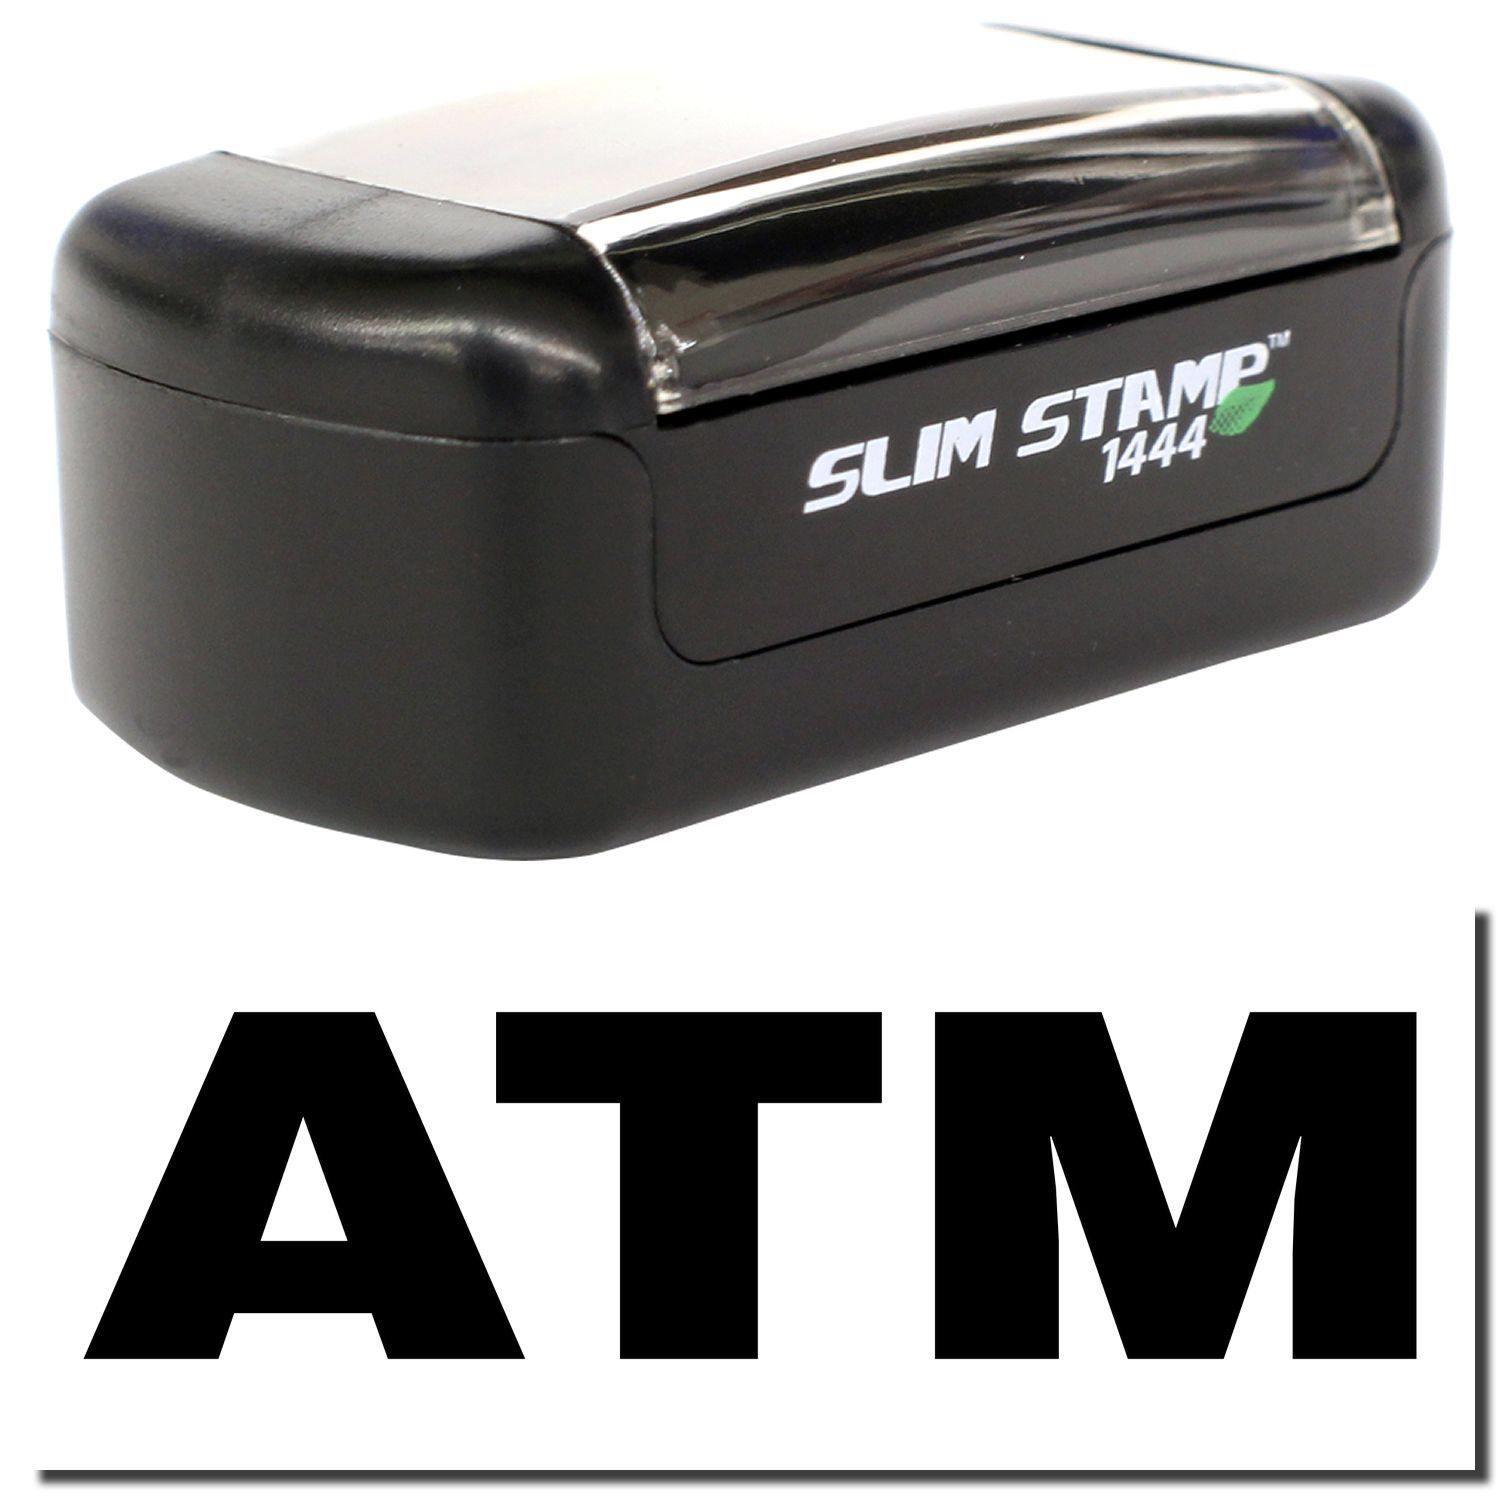 A stock office pre-inked stamp with a stamped image showing how the text "ATM" is displayed after stamping.